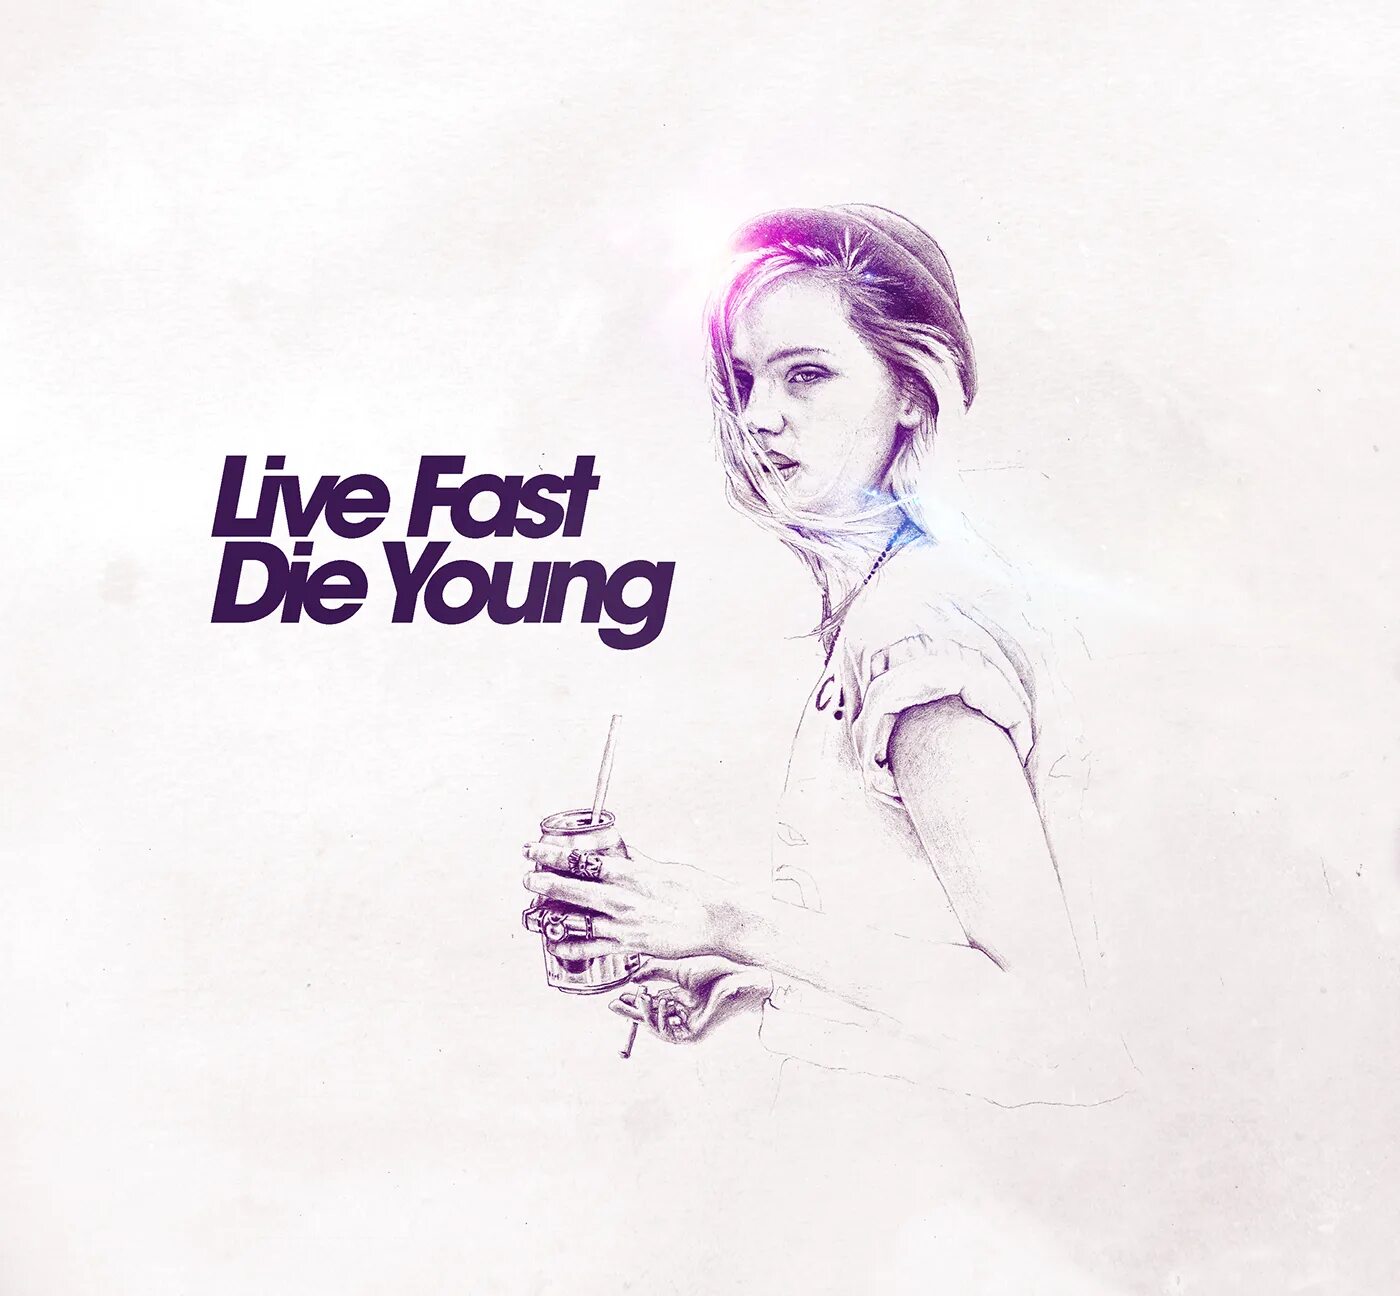 Life die young. Live fast die fast. Live fast die young. Live fast die young оригинал. Live fast die young моноиллюстрация.